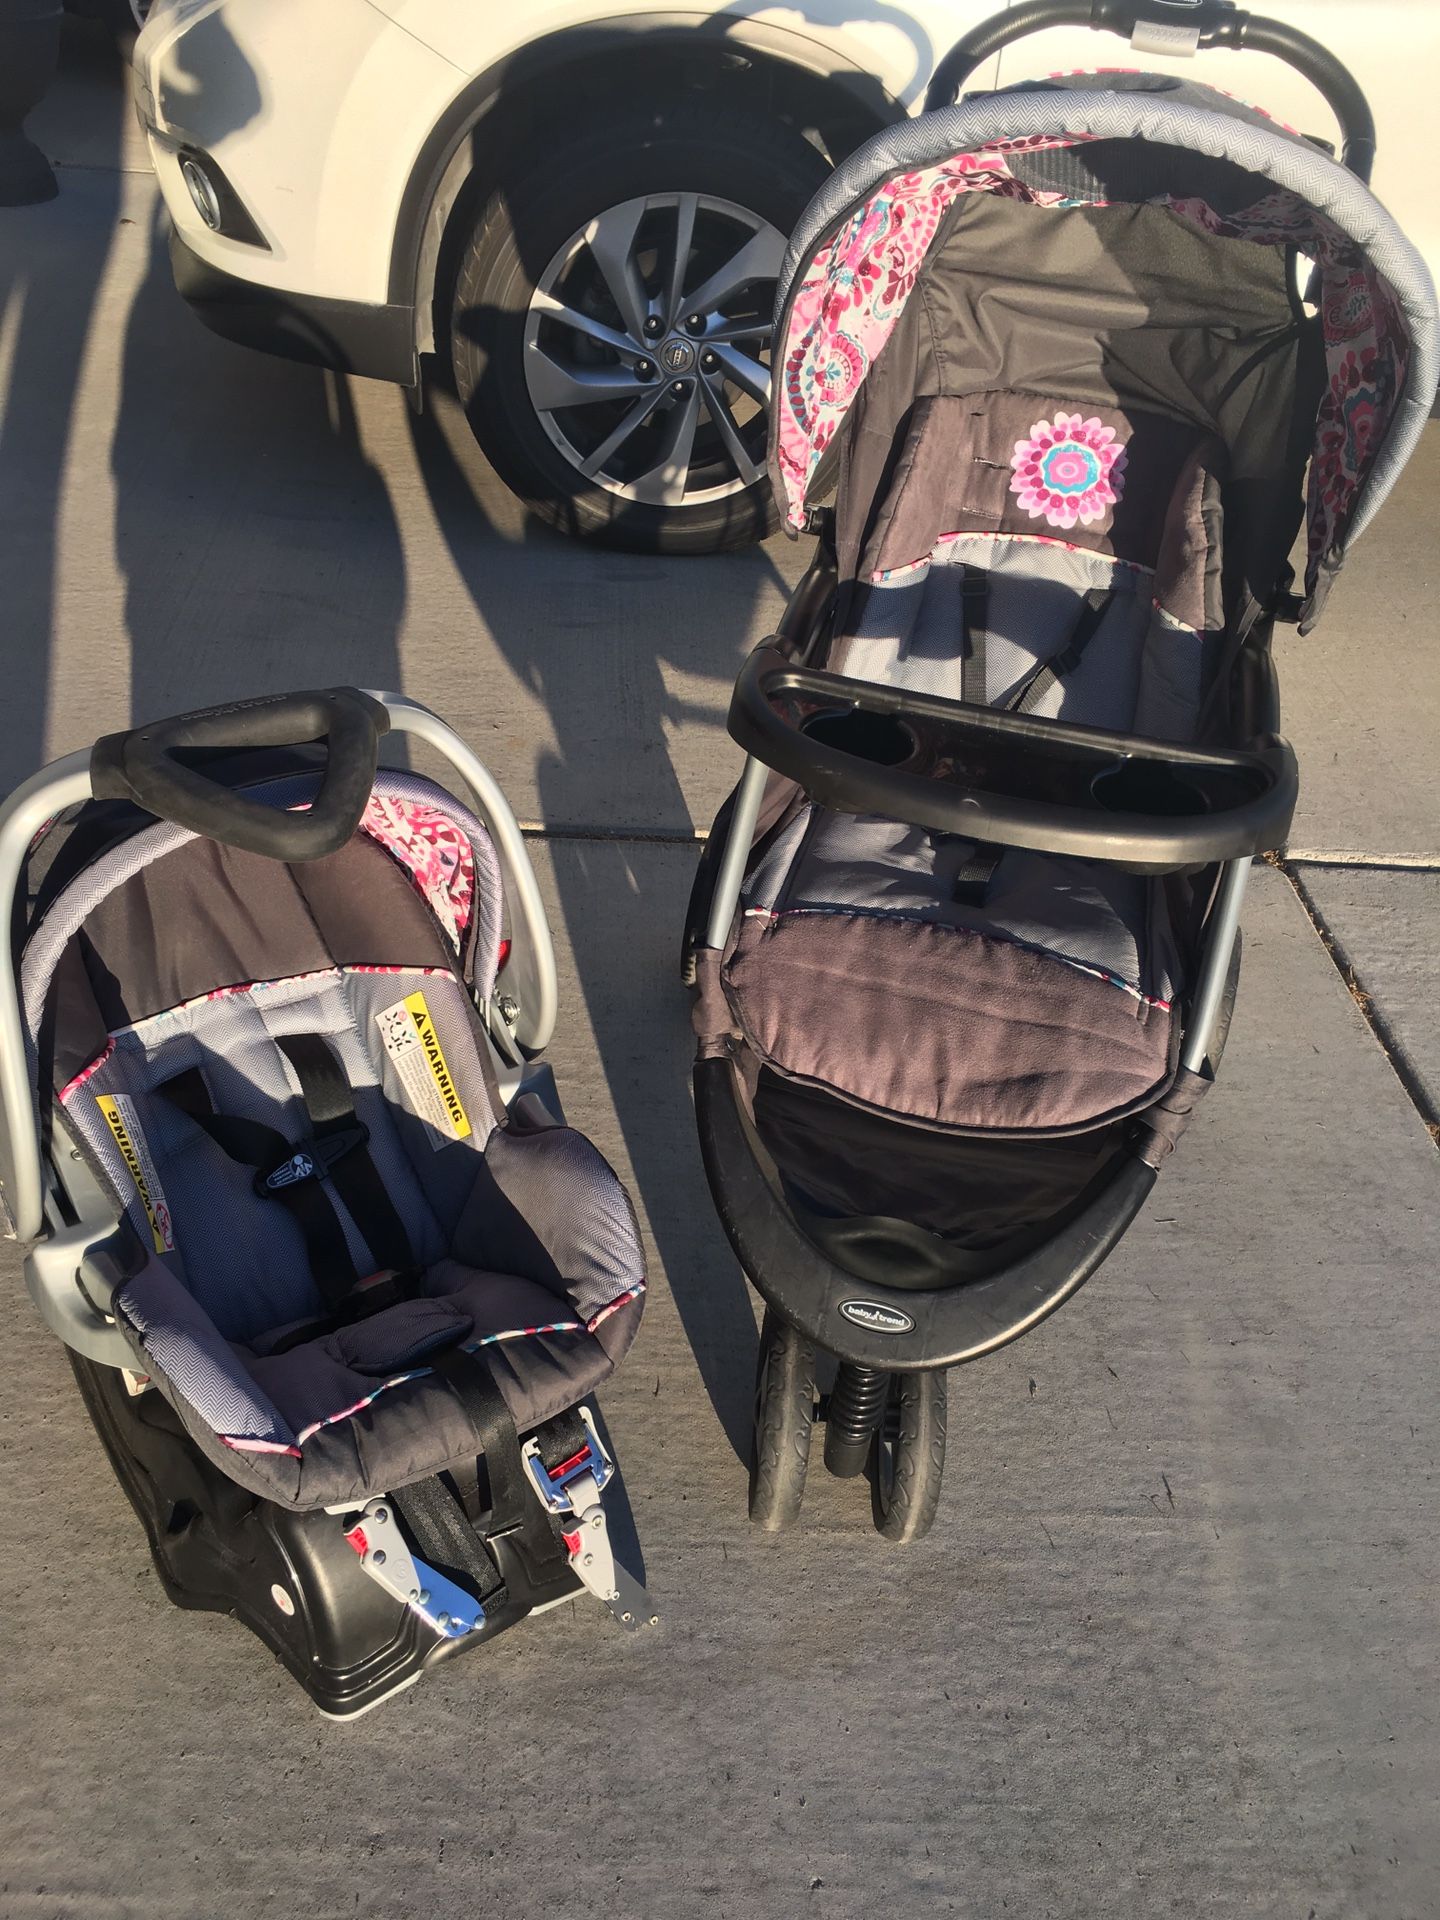 🎀Stroller and car seat combo🎀 Adorable